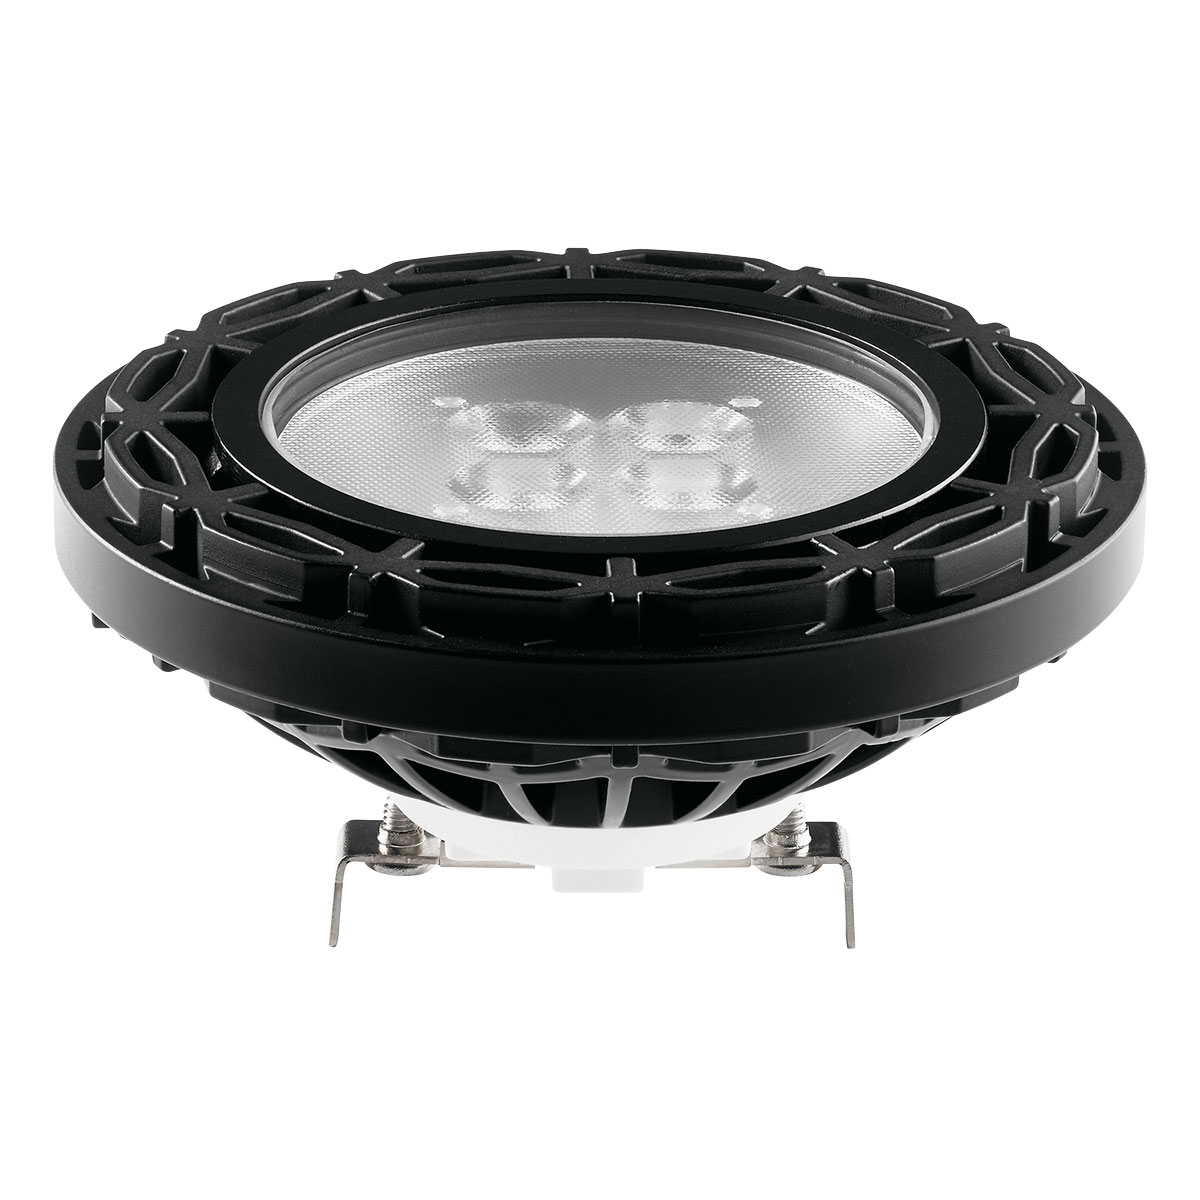 This wet location PAR36 12V LED lamp compares to the 35W Halogen. Featuring a 2700K warm white temperature, this lamp puts forth a 15-degree spot beam spread angle.